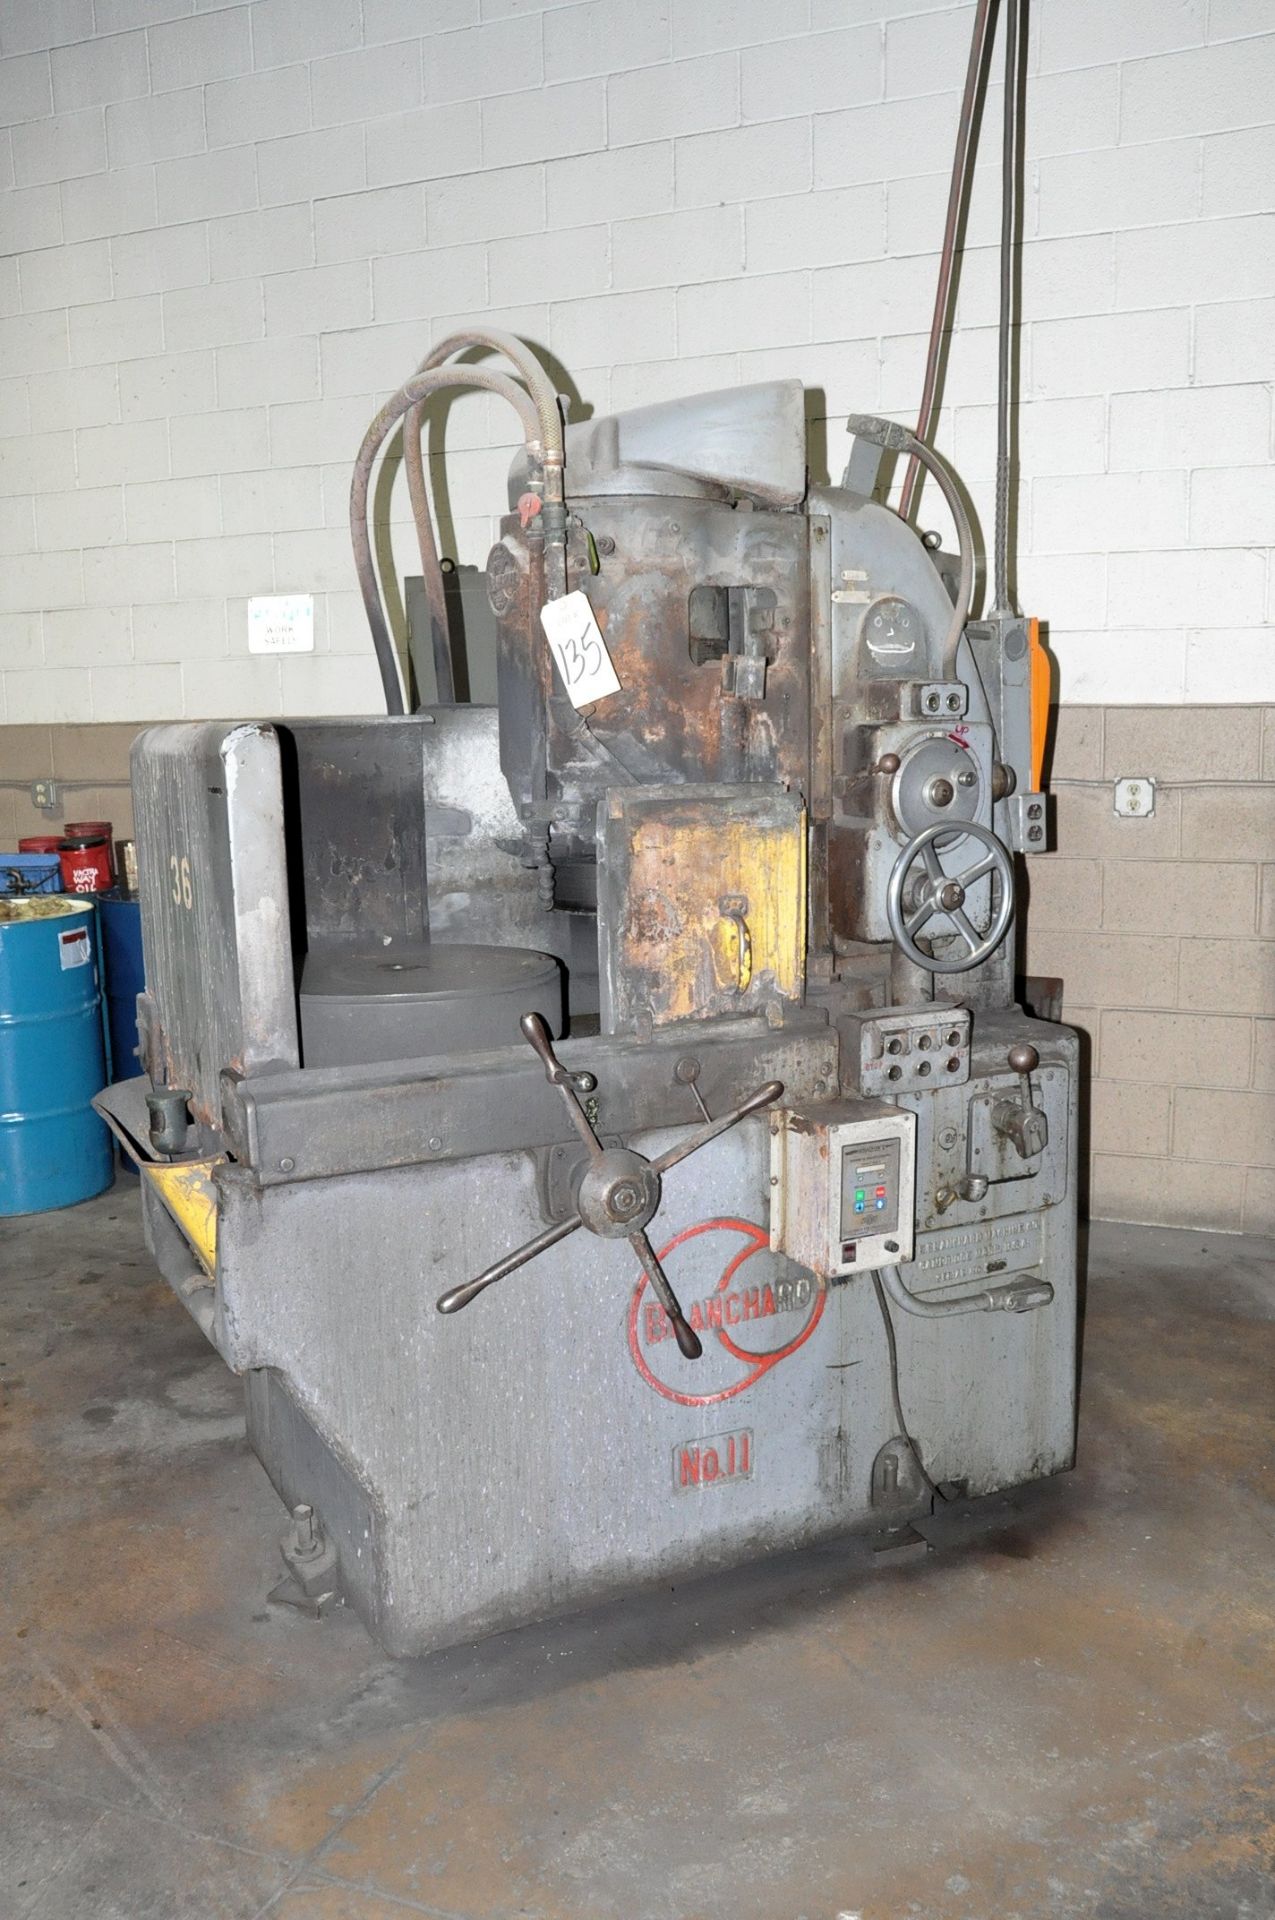 BLANCHARD No. 11, ROTARY SURFACE GRINDER, S/n 7380 (1953), 20" Chuck, One Piece Grinding Wheel,